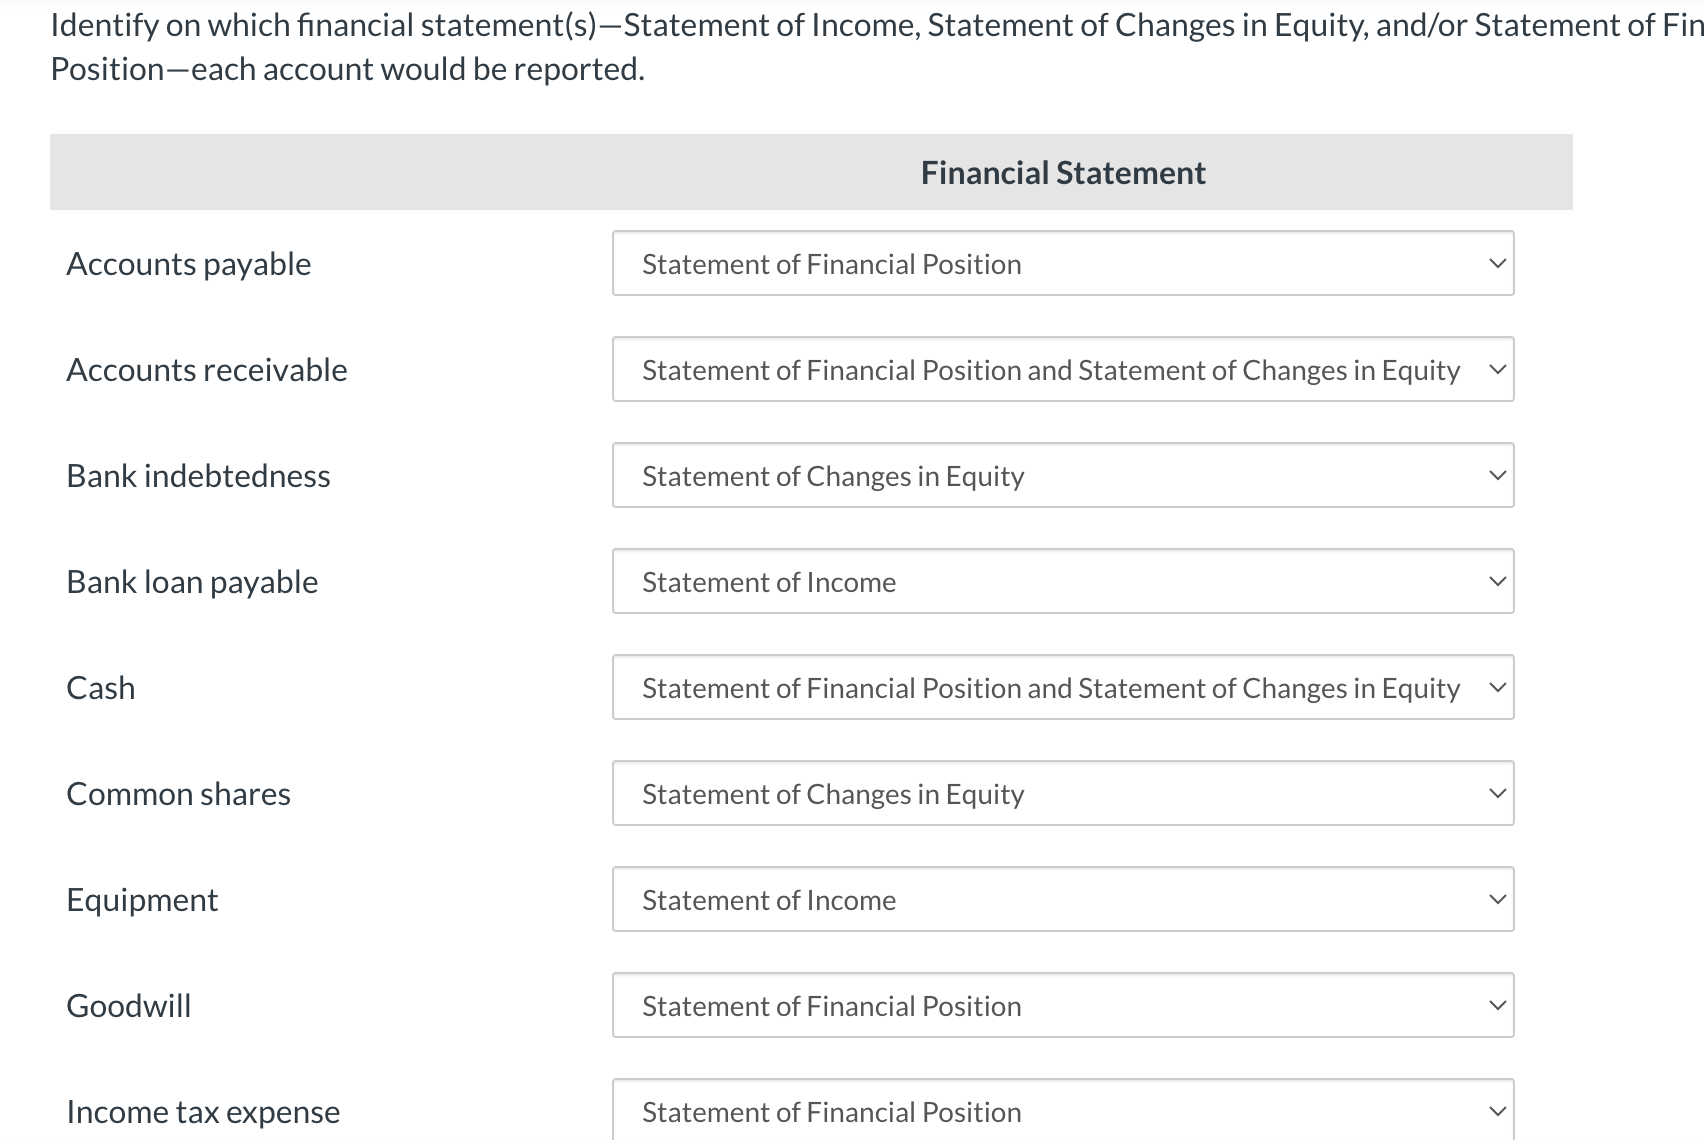 Identify on which financial statement(s)-Statement of Income, Statement of Changes in Equity, and/or